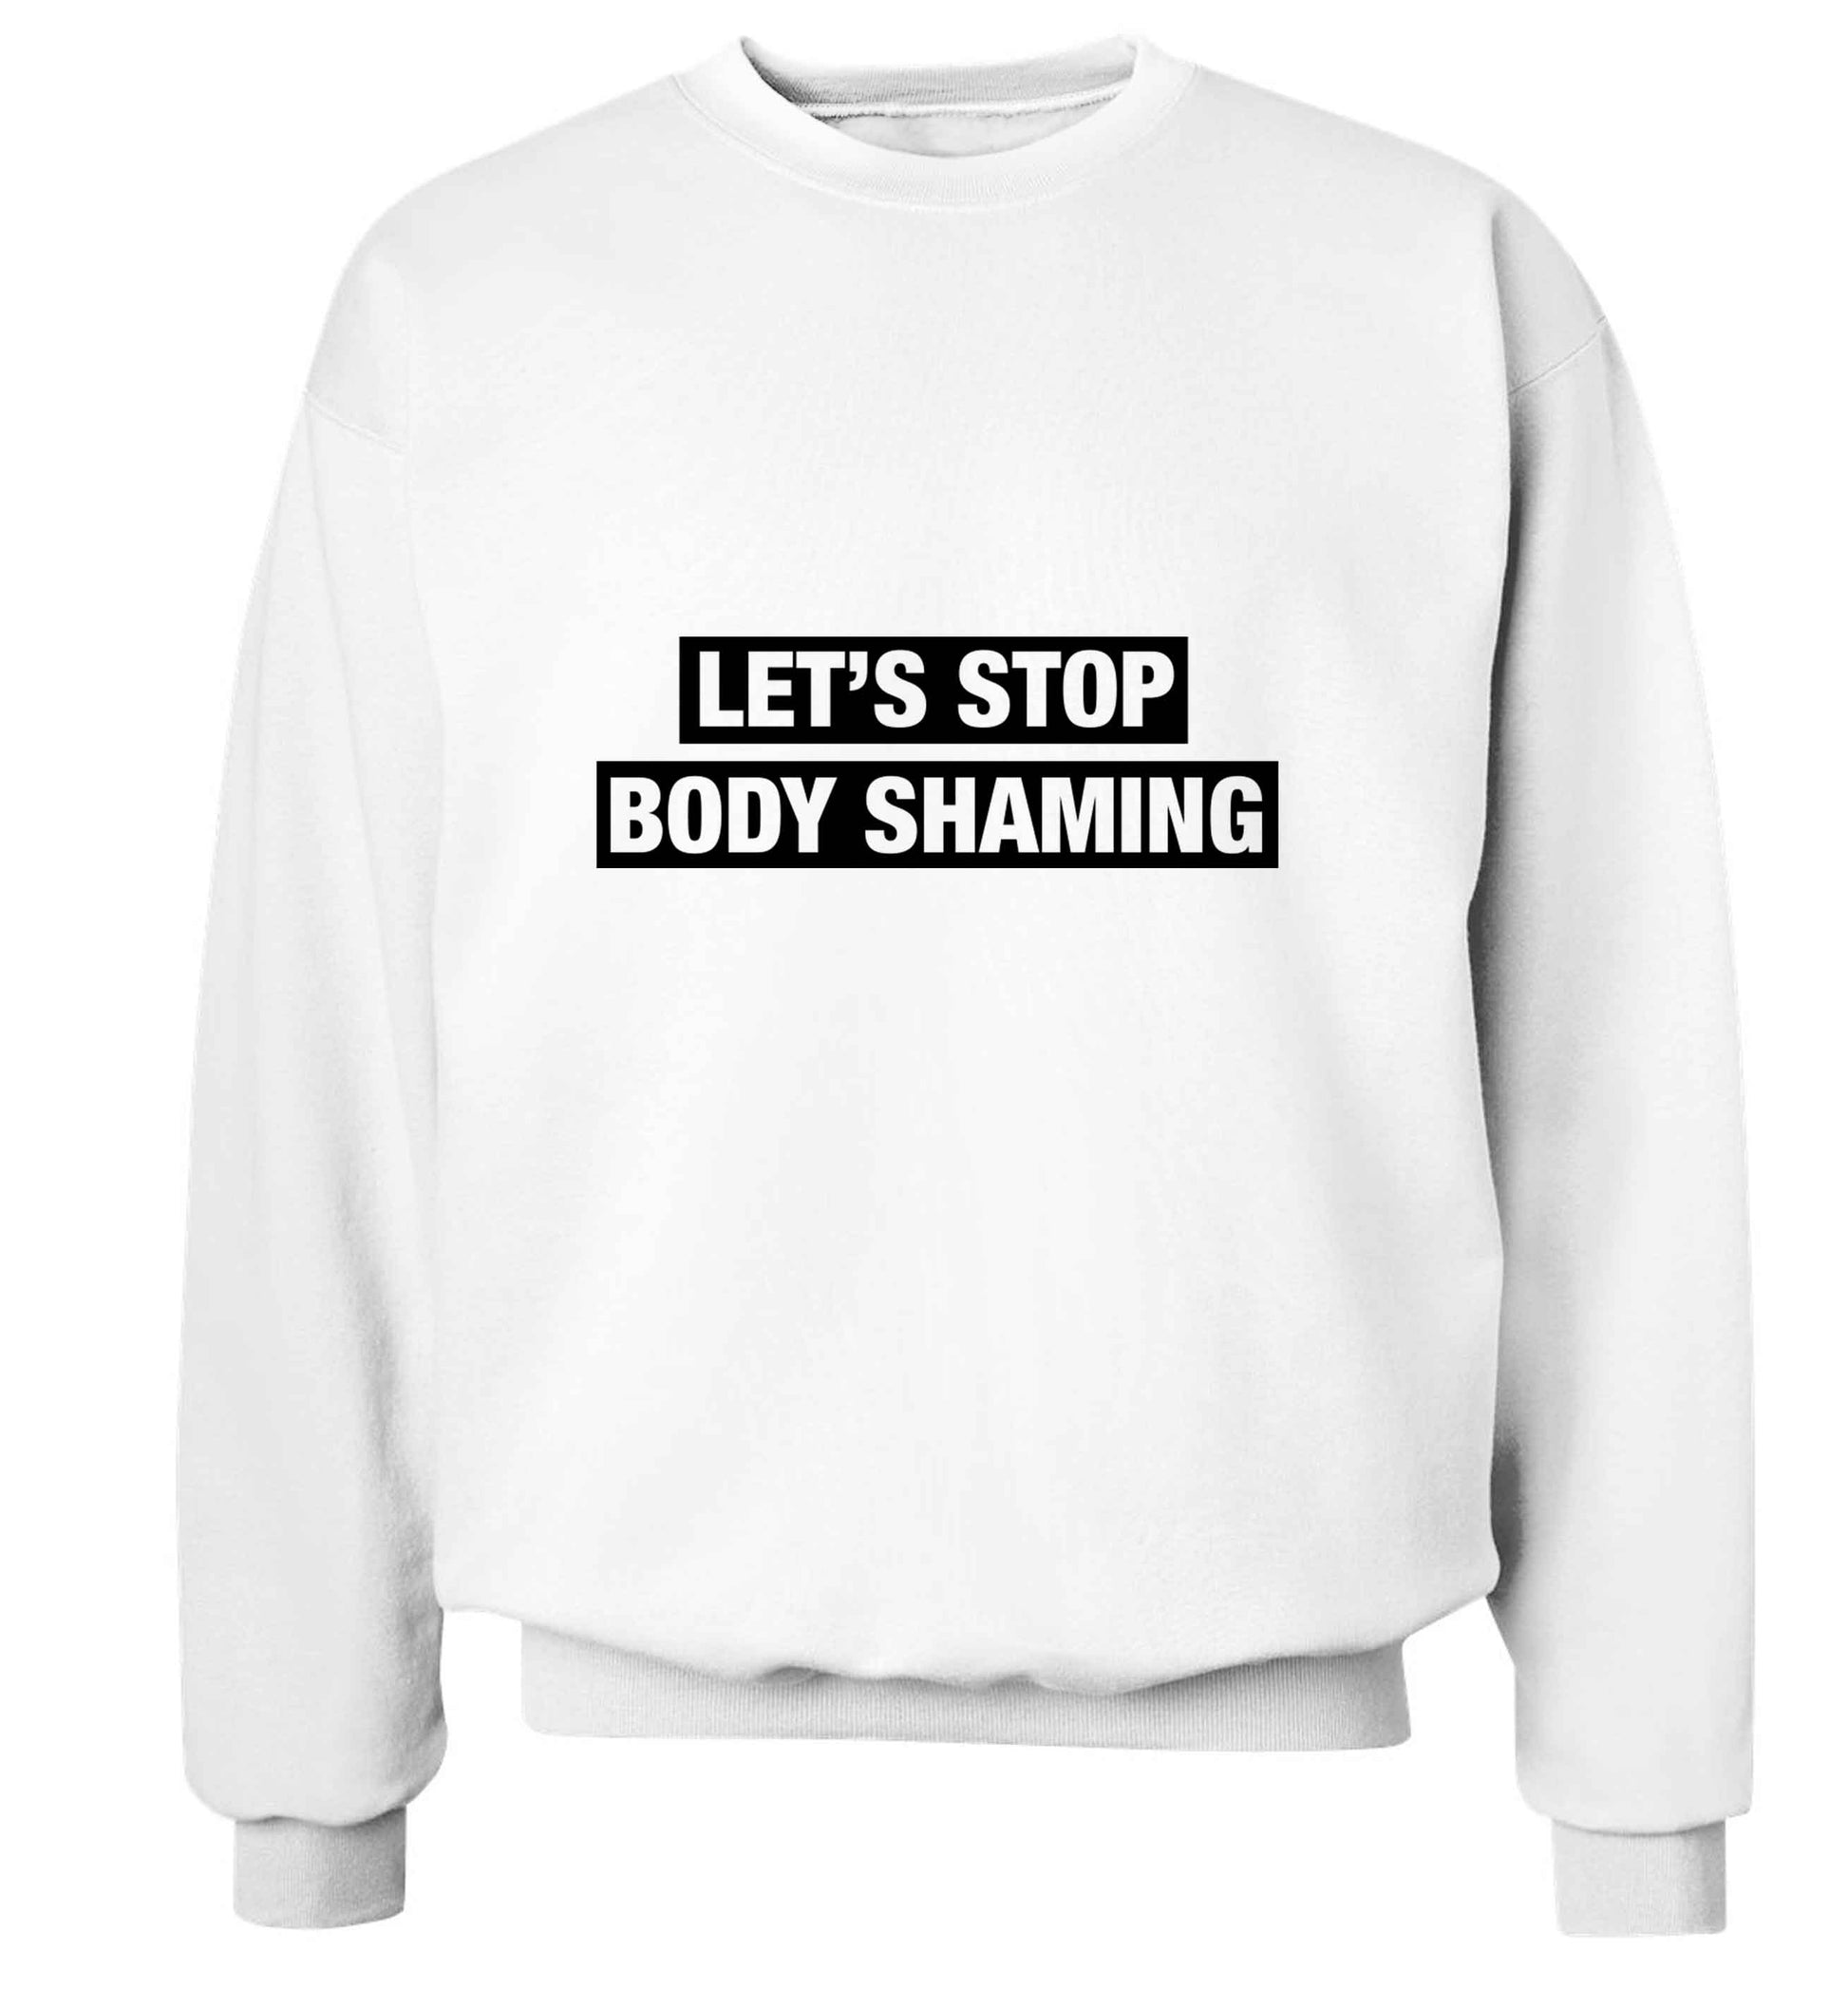 Let's stop body shaming adult's unisex white sweater 2XL